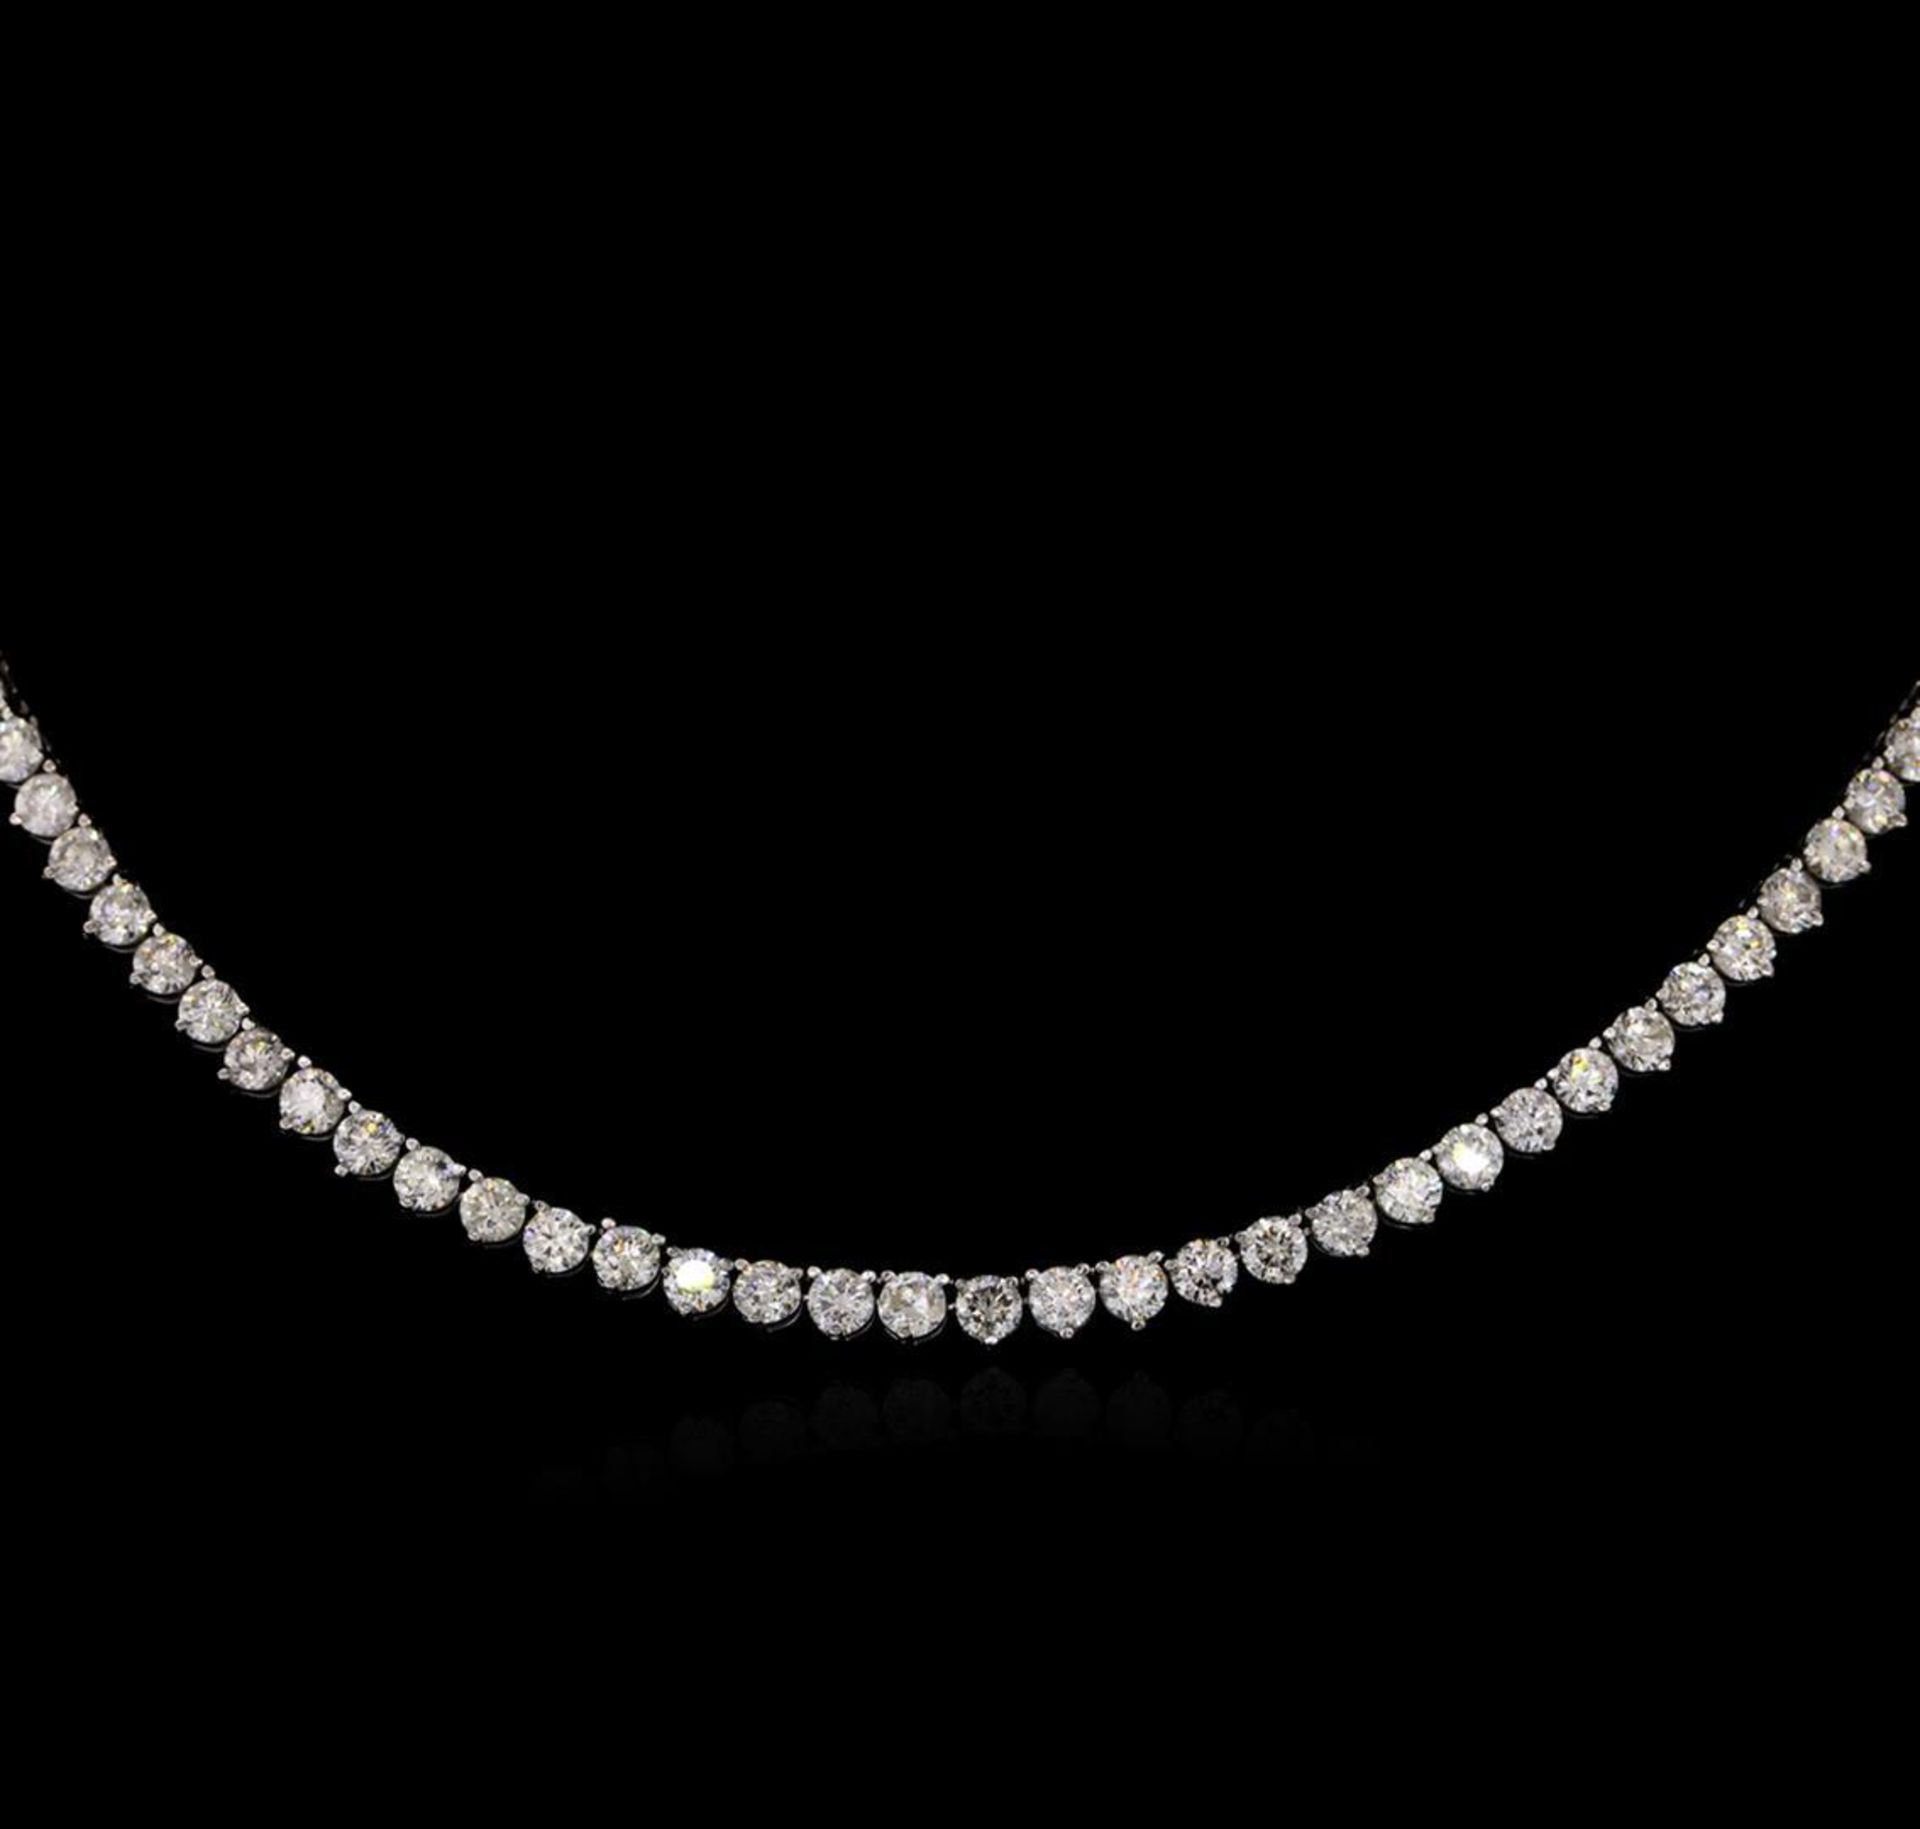 14KT White Gold 19.68 ctw Diamond Necklace - Image 2 of 3